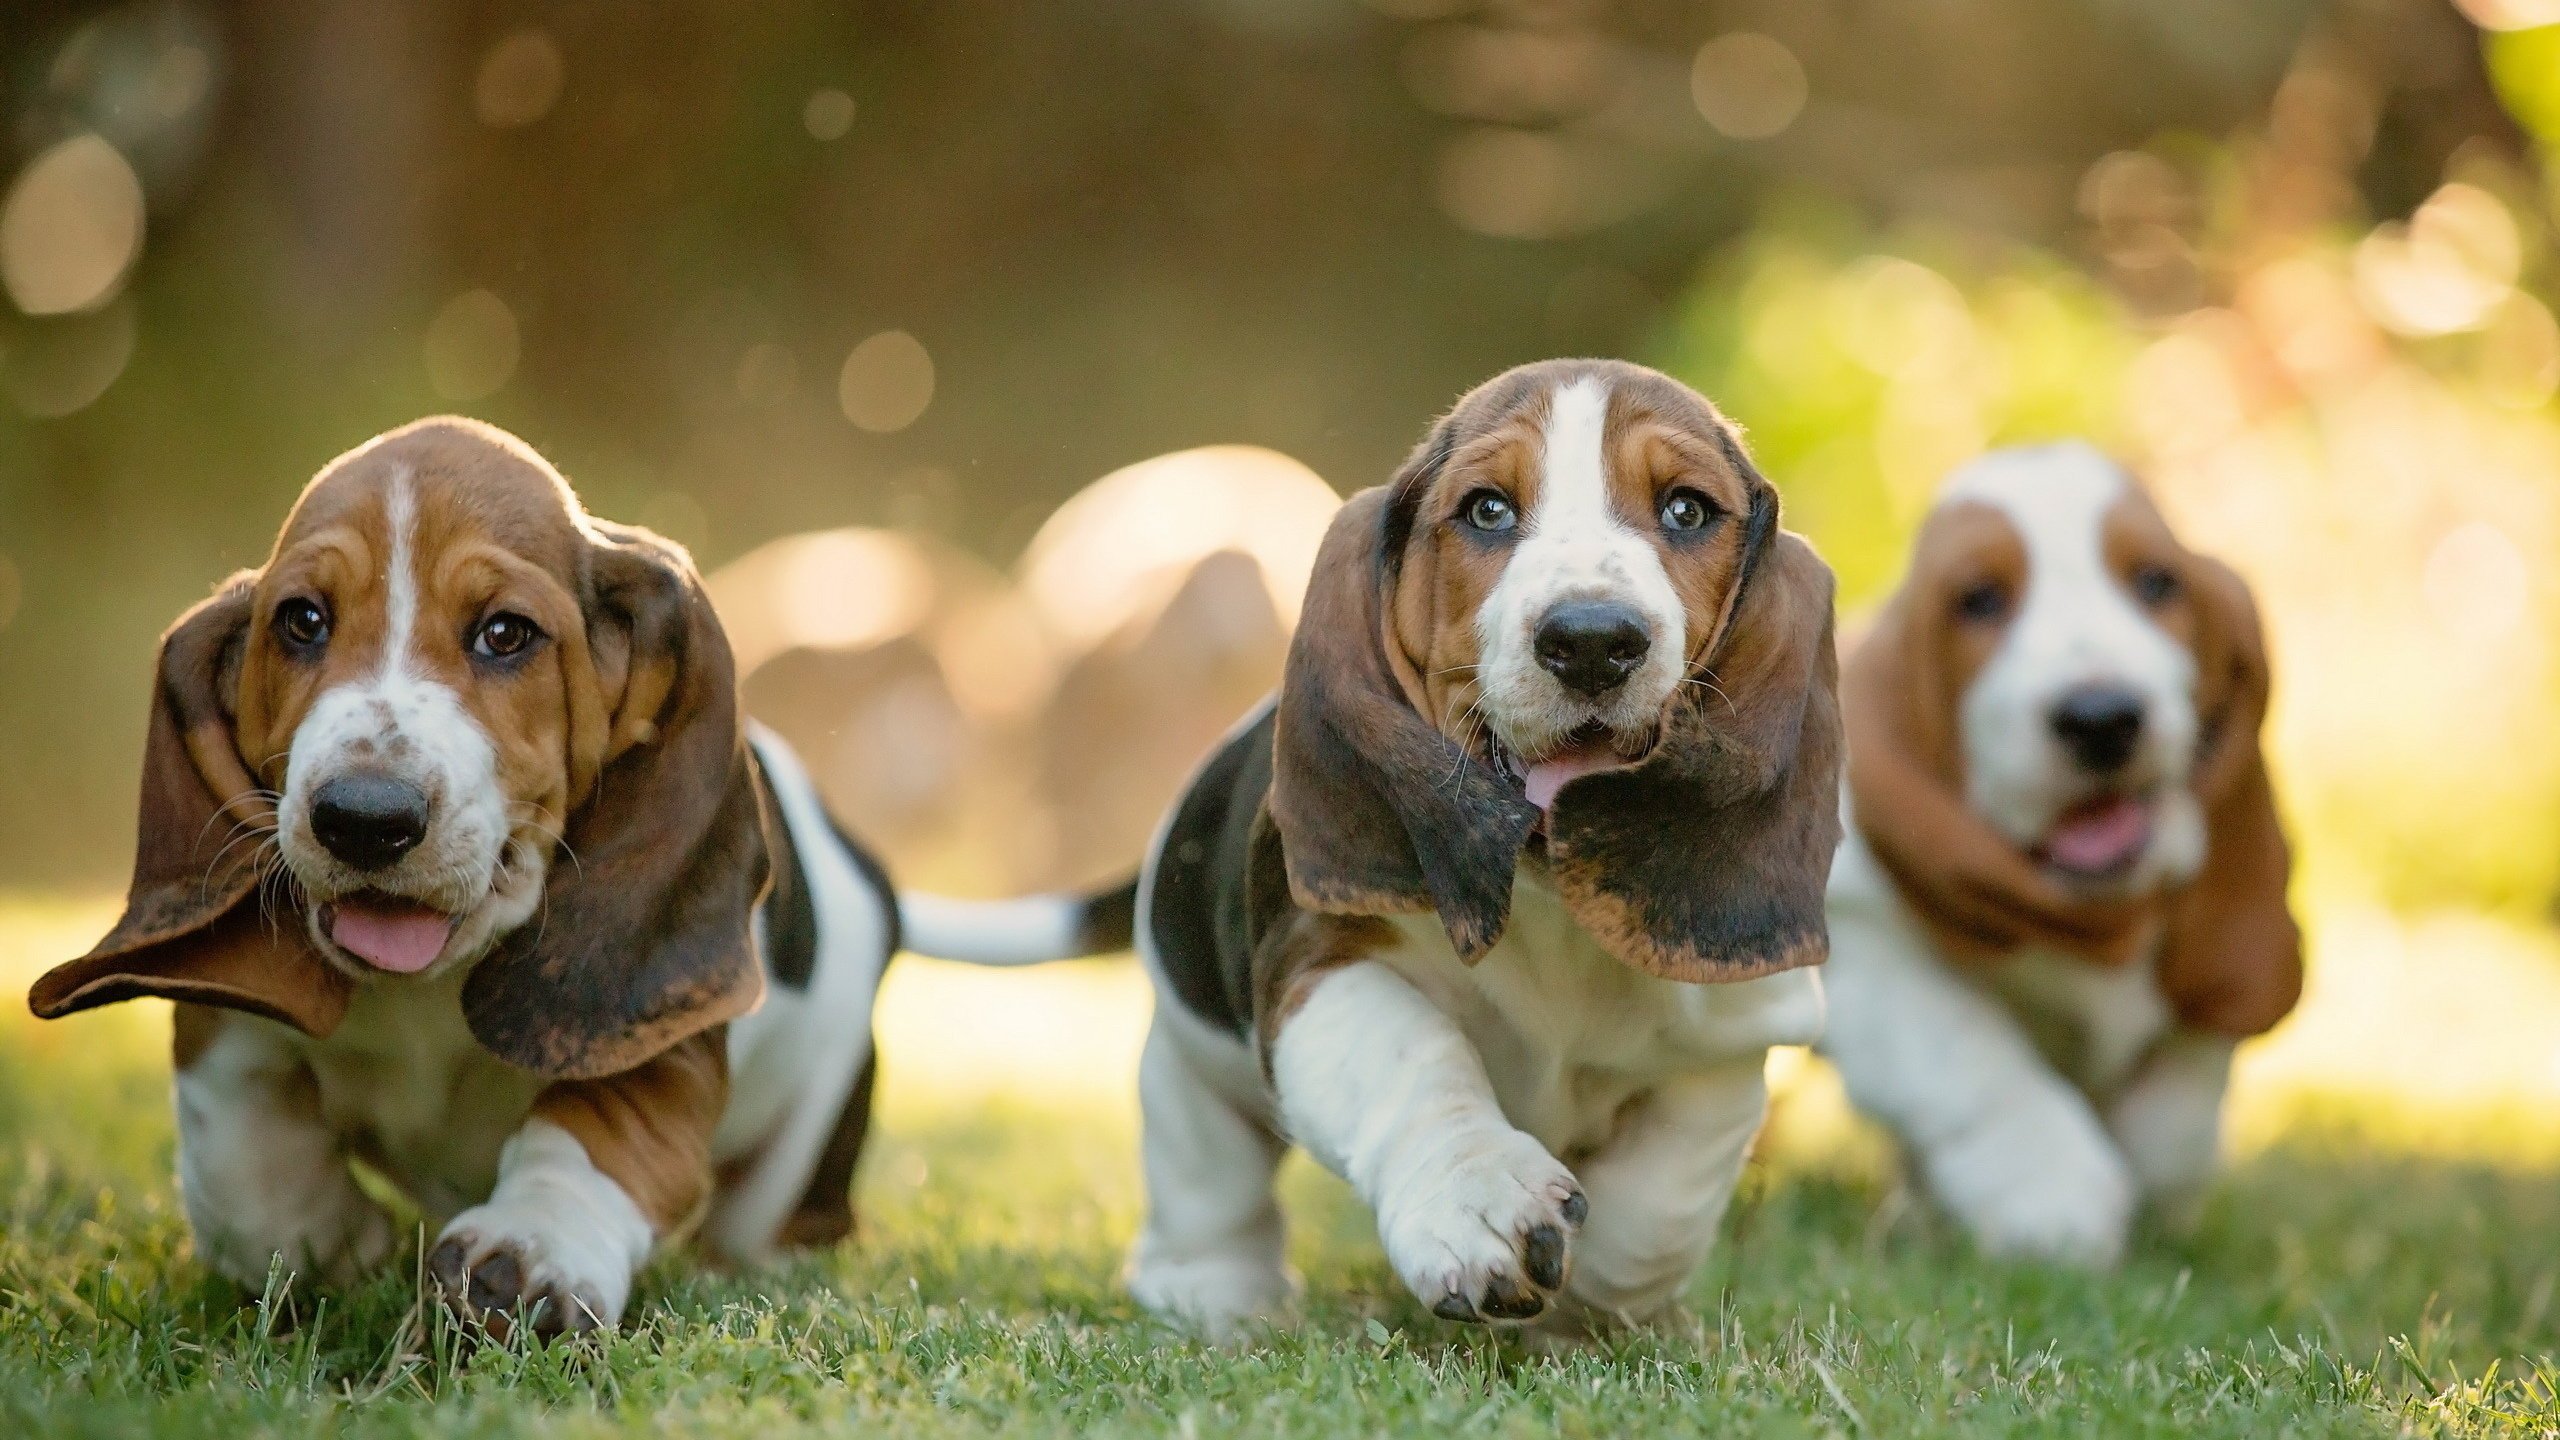 Basset Hound Puppies The Ultimate Guide For New Dog Owners The Dog People By Rover Com